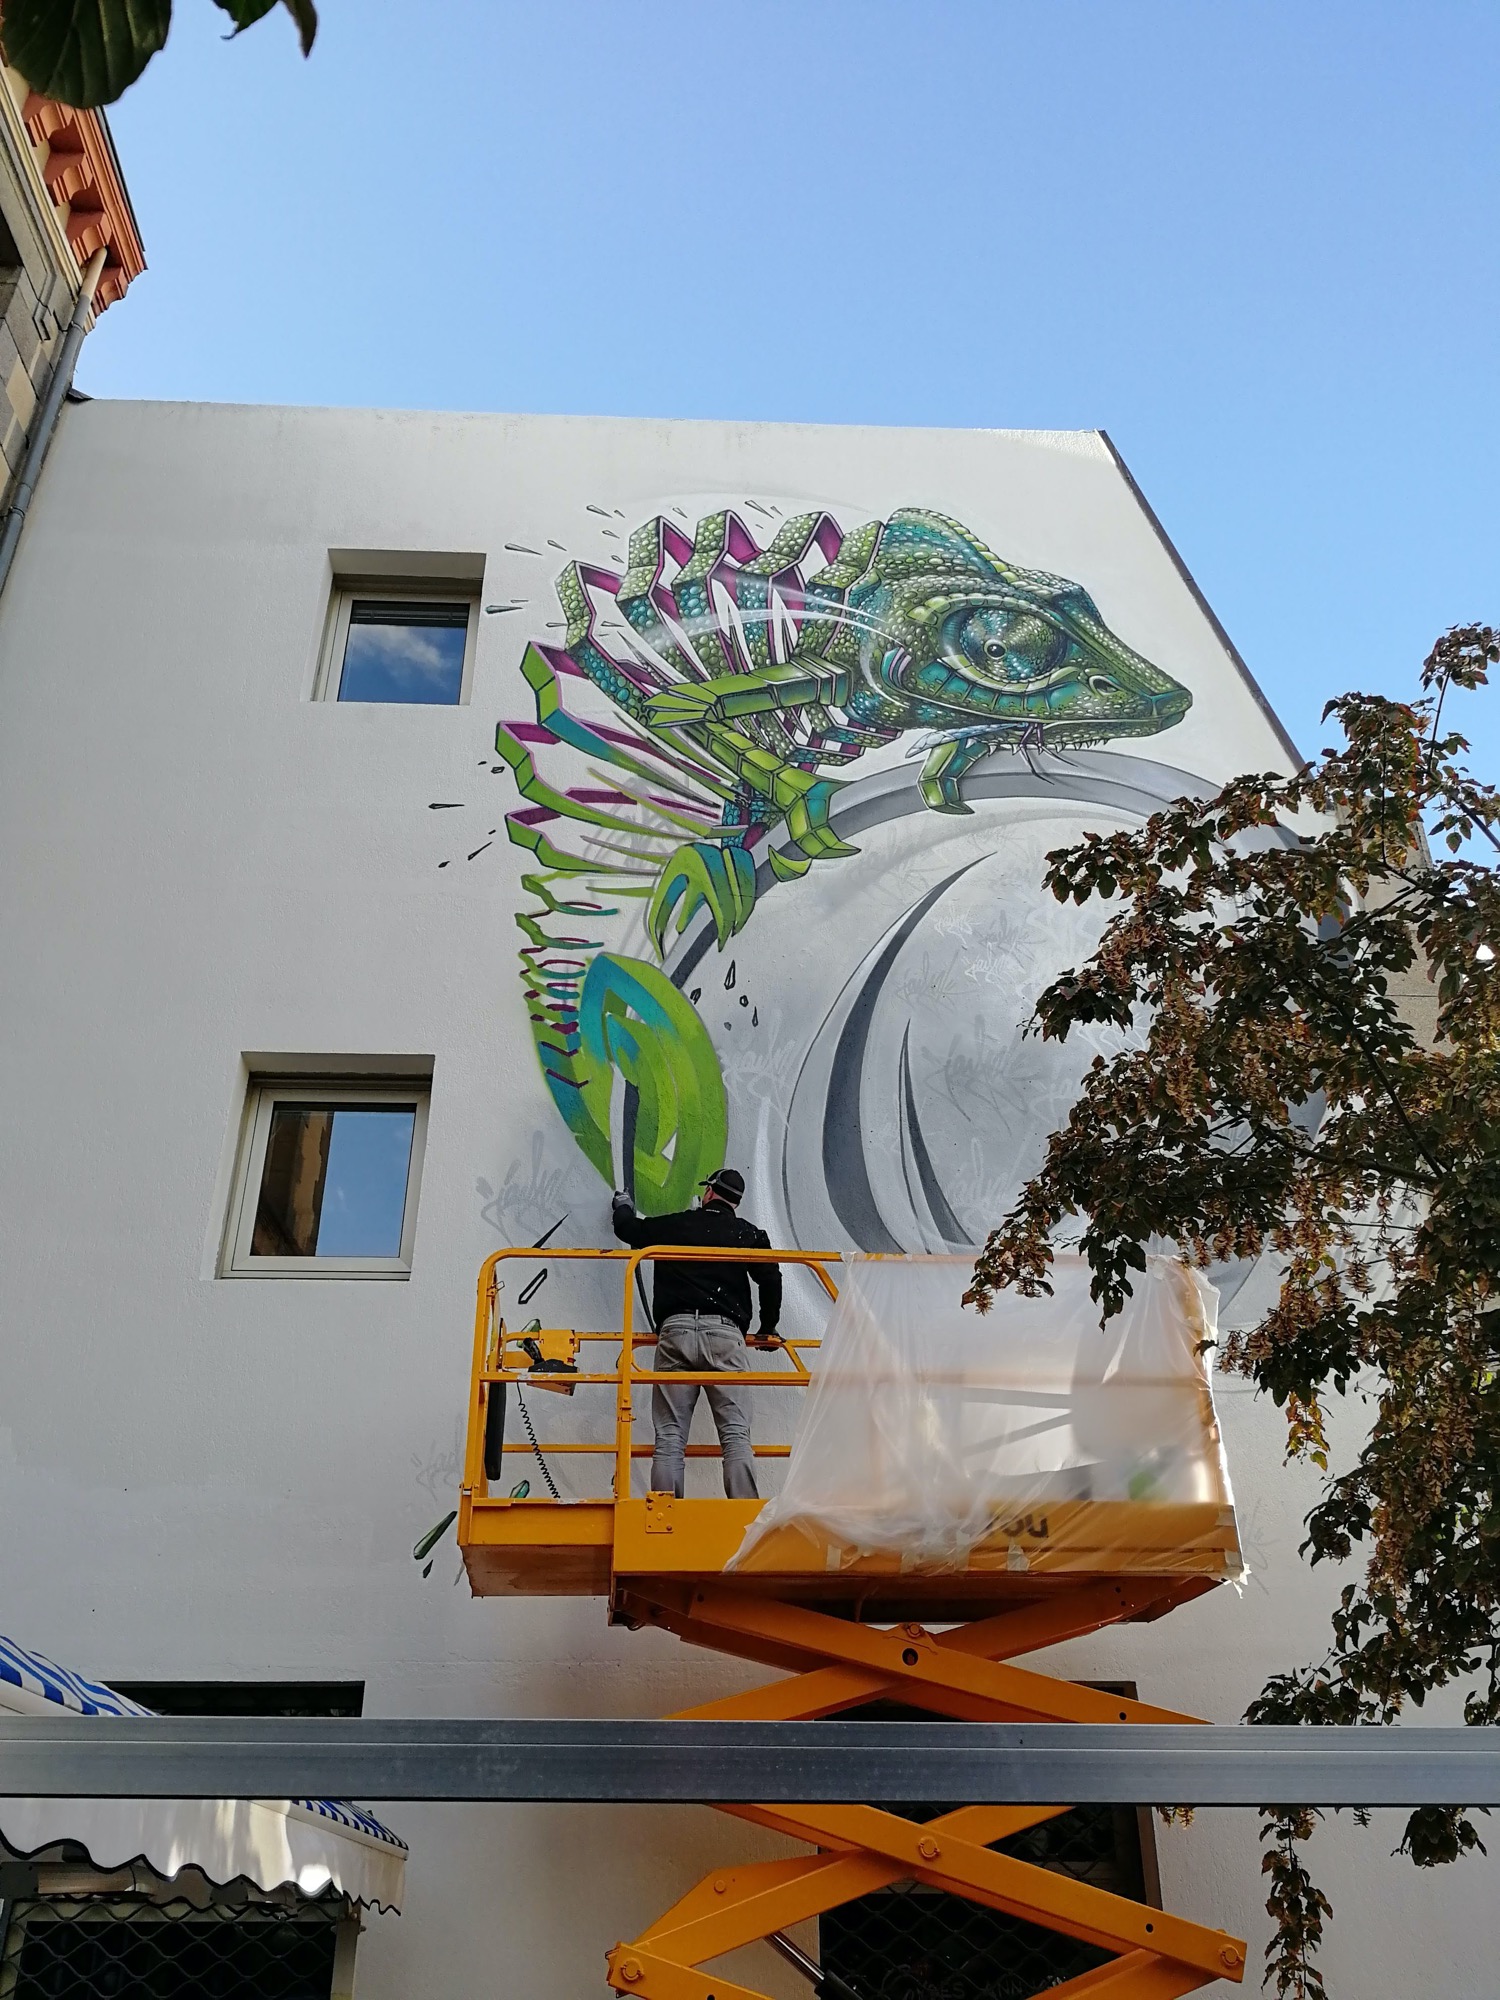 Graffiti 4468  by the artist Jayn captured by Rabot in Saint-Brieuc France